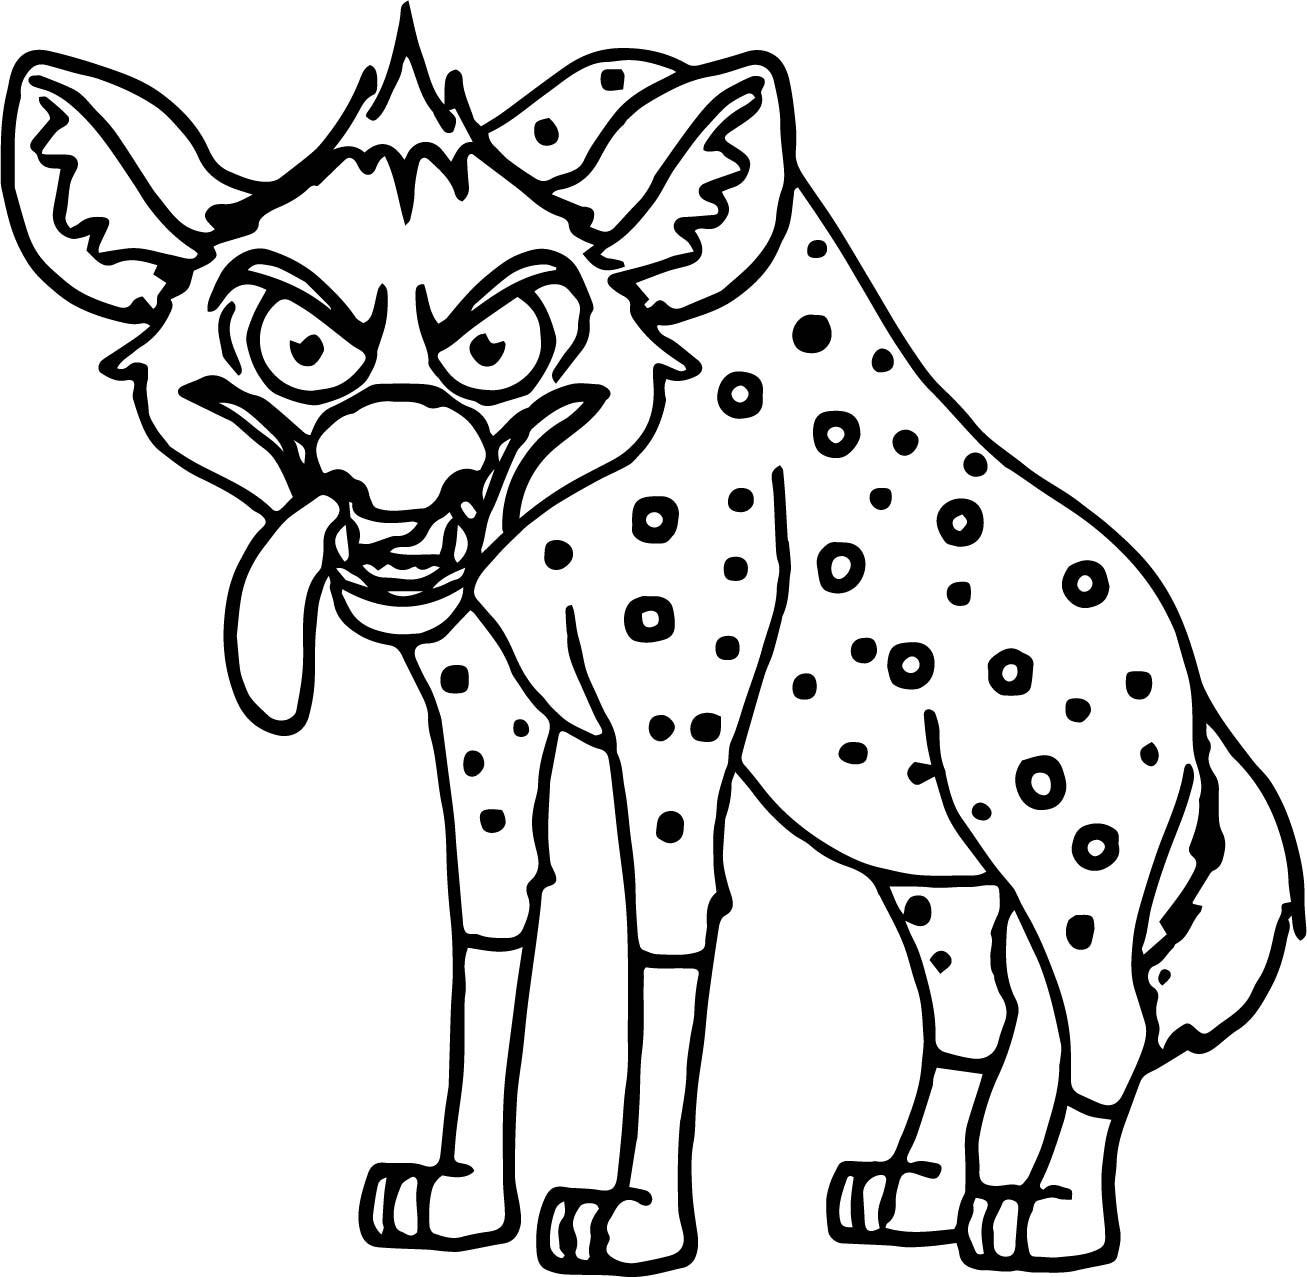 Hyena Coloring Pages
 Angry Looking Hyena Cartoon Coloring Page